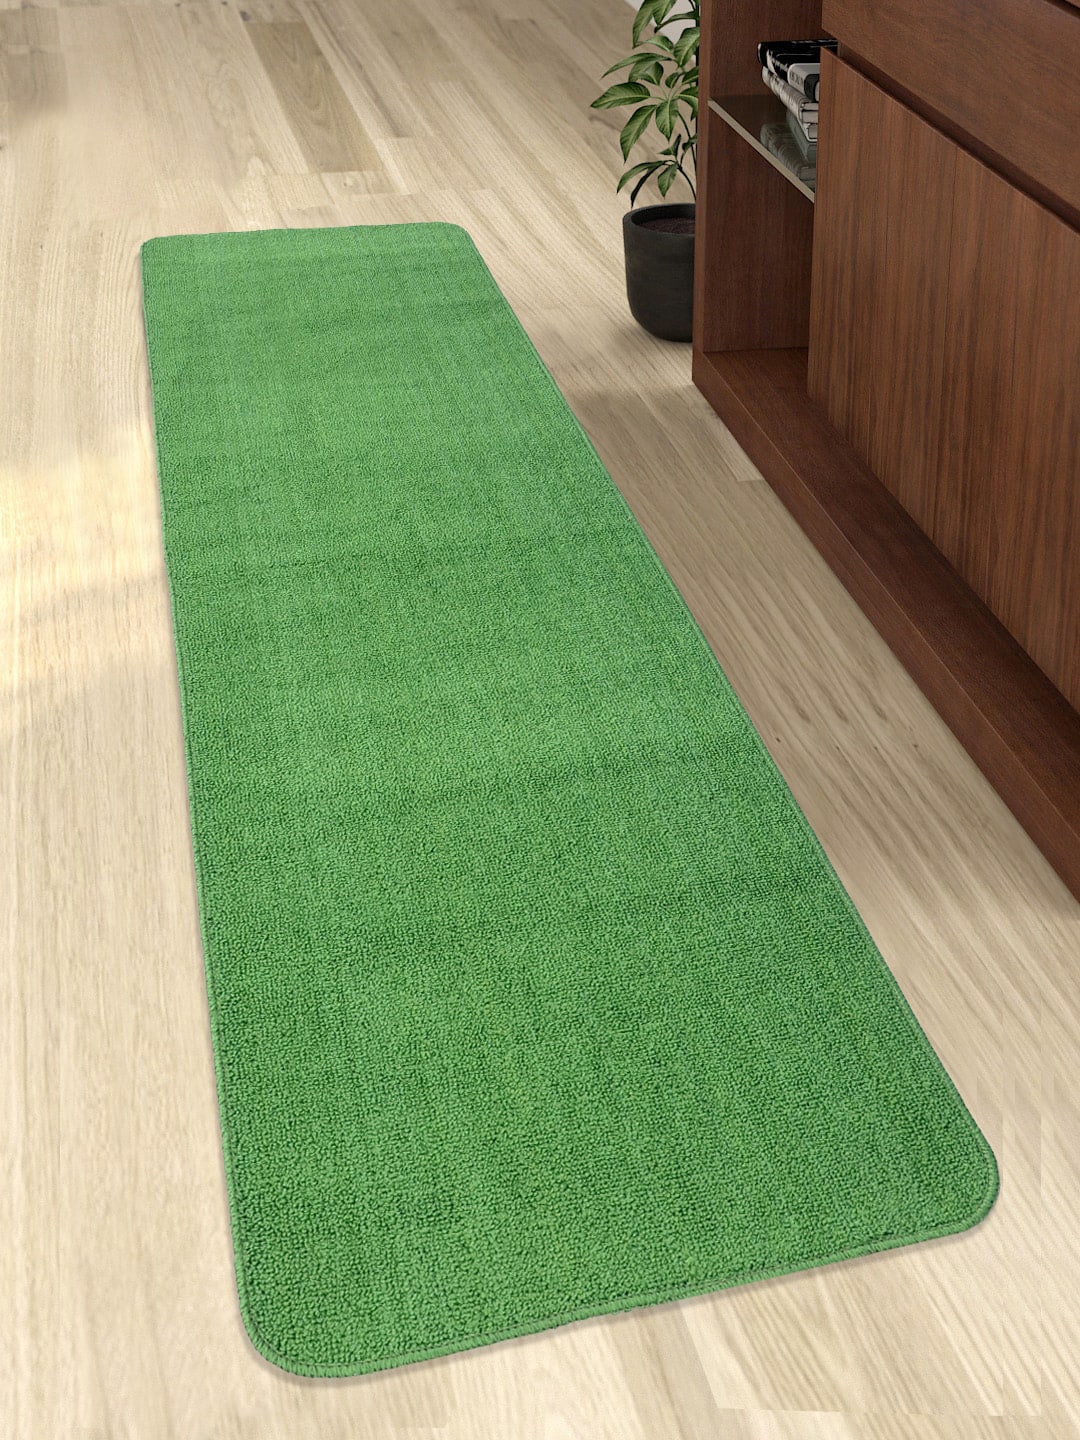 Saral Home Green Solid Anti-Skid Floor Runner Price in India